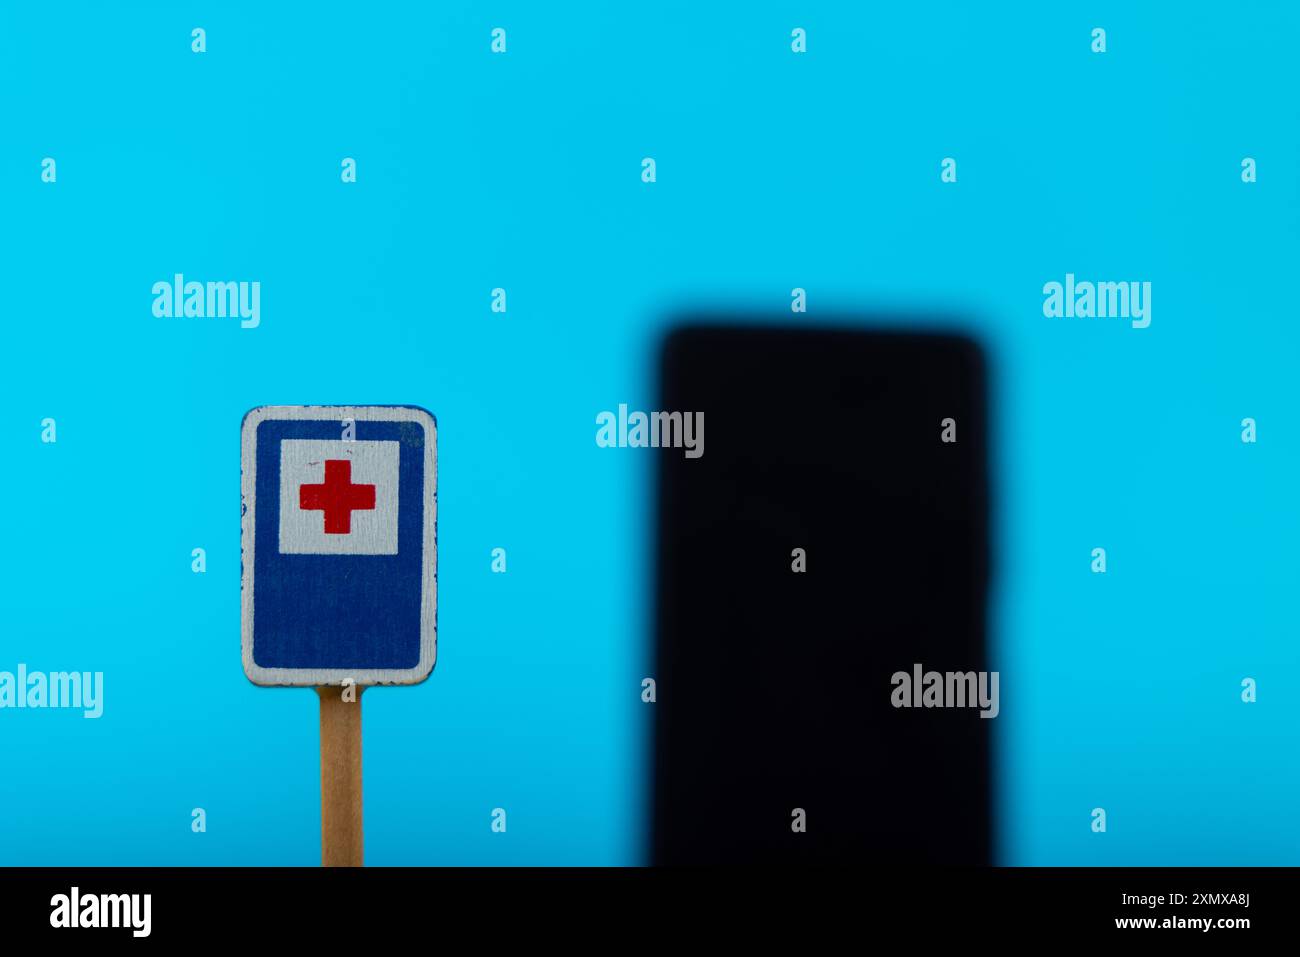 A detailed shot of a wooden toy hospital warning sign, with a smartphone slightly blurred behind it, all set on a blue background, offering a conceptu Stock Photo